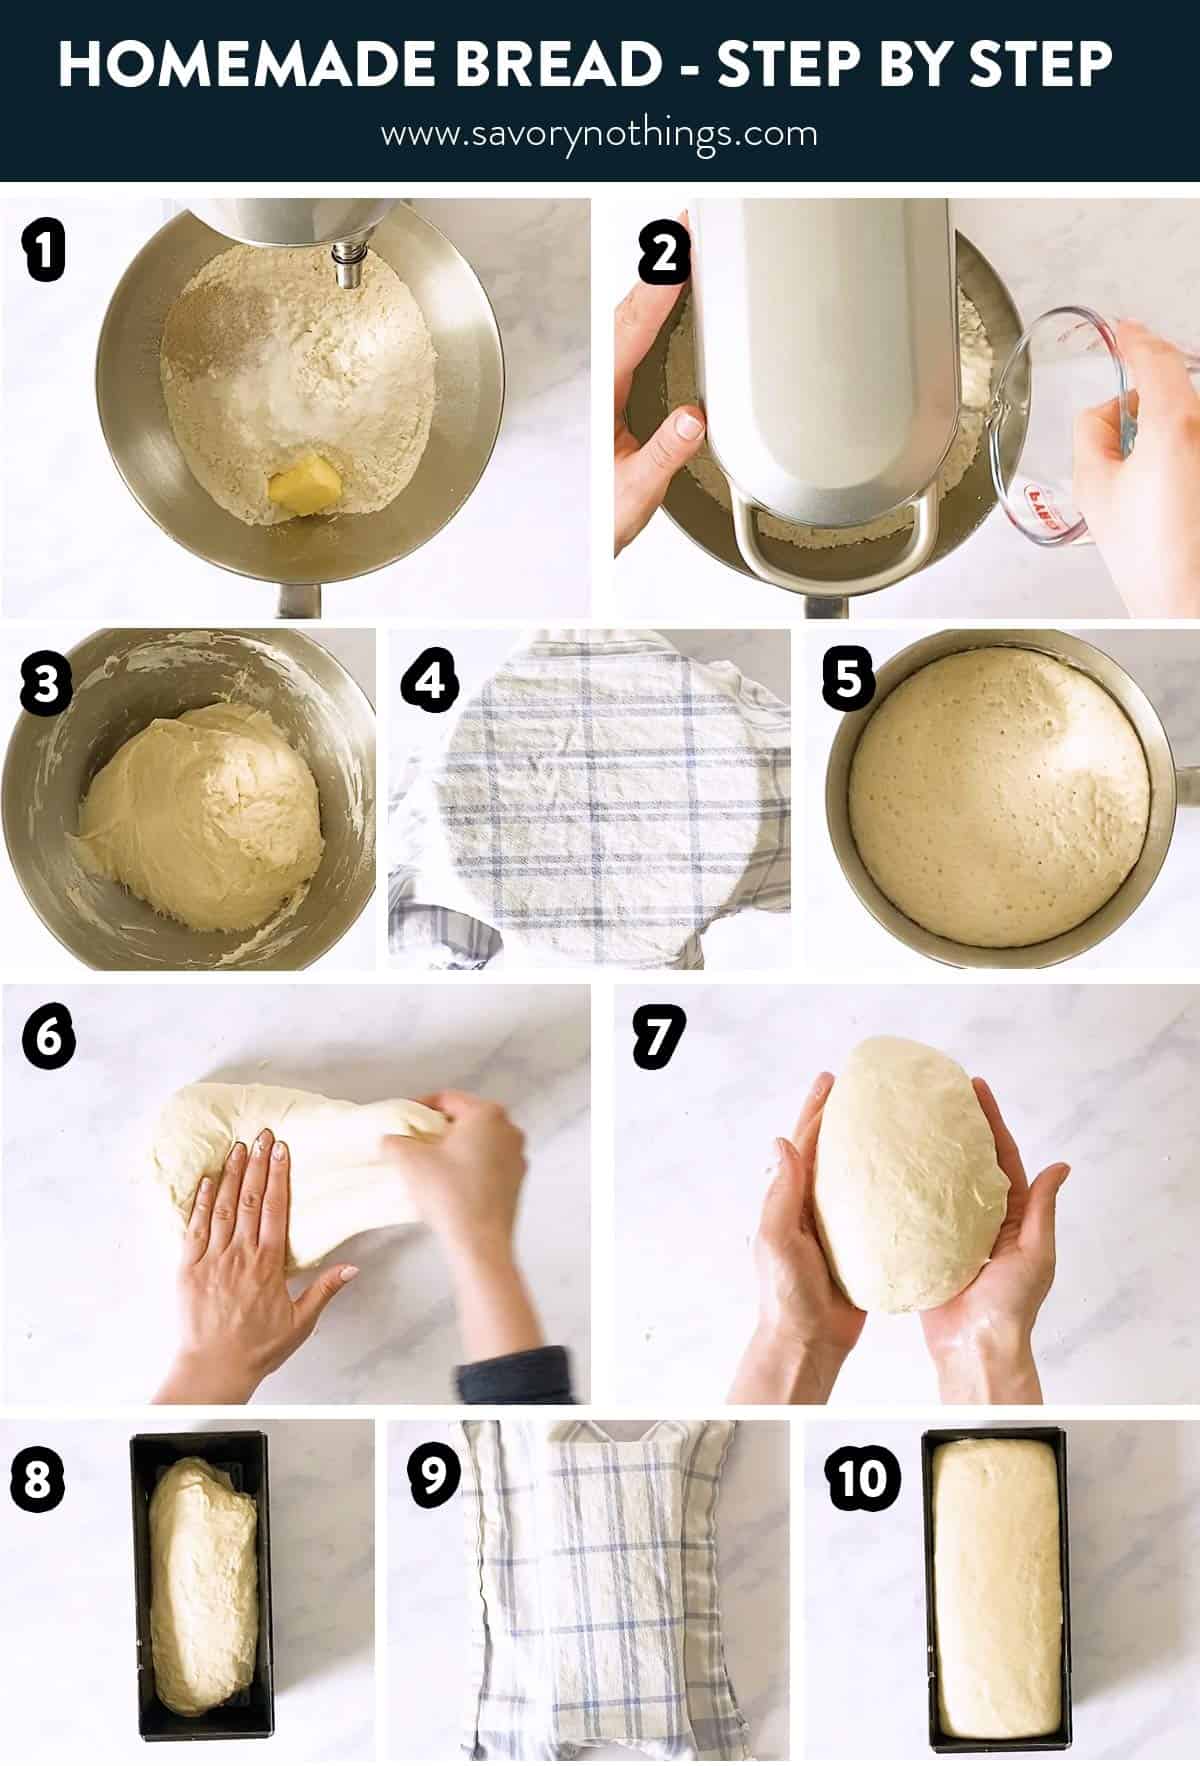 photo collage to show the steps in making homemade bread